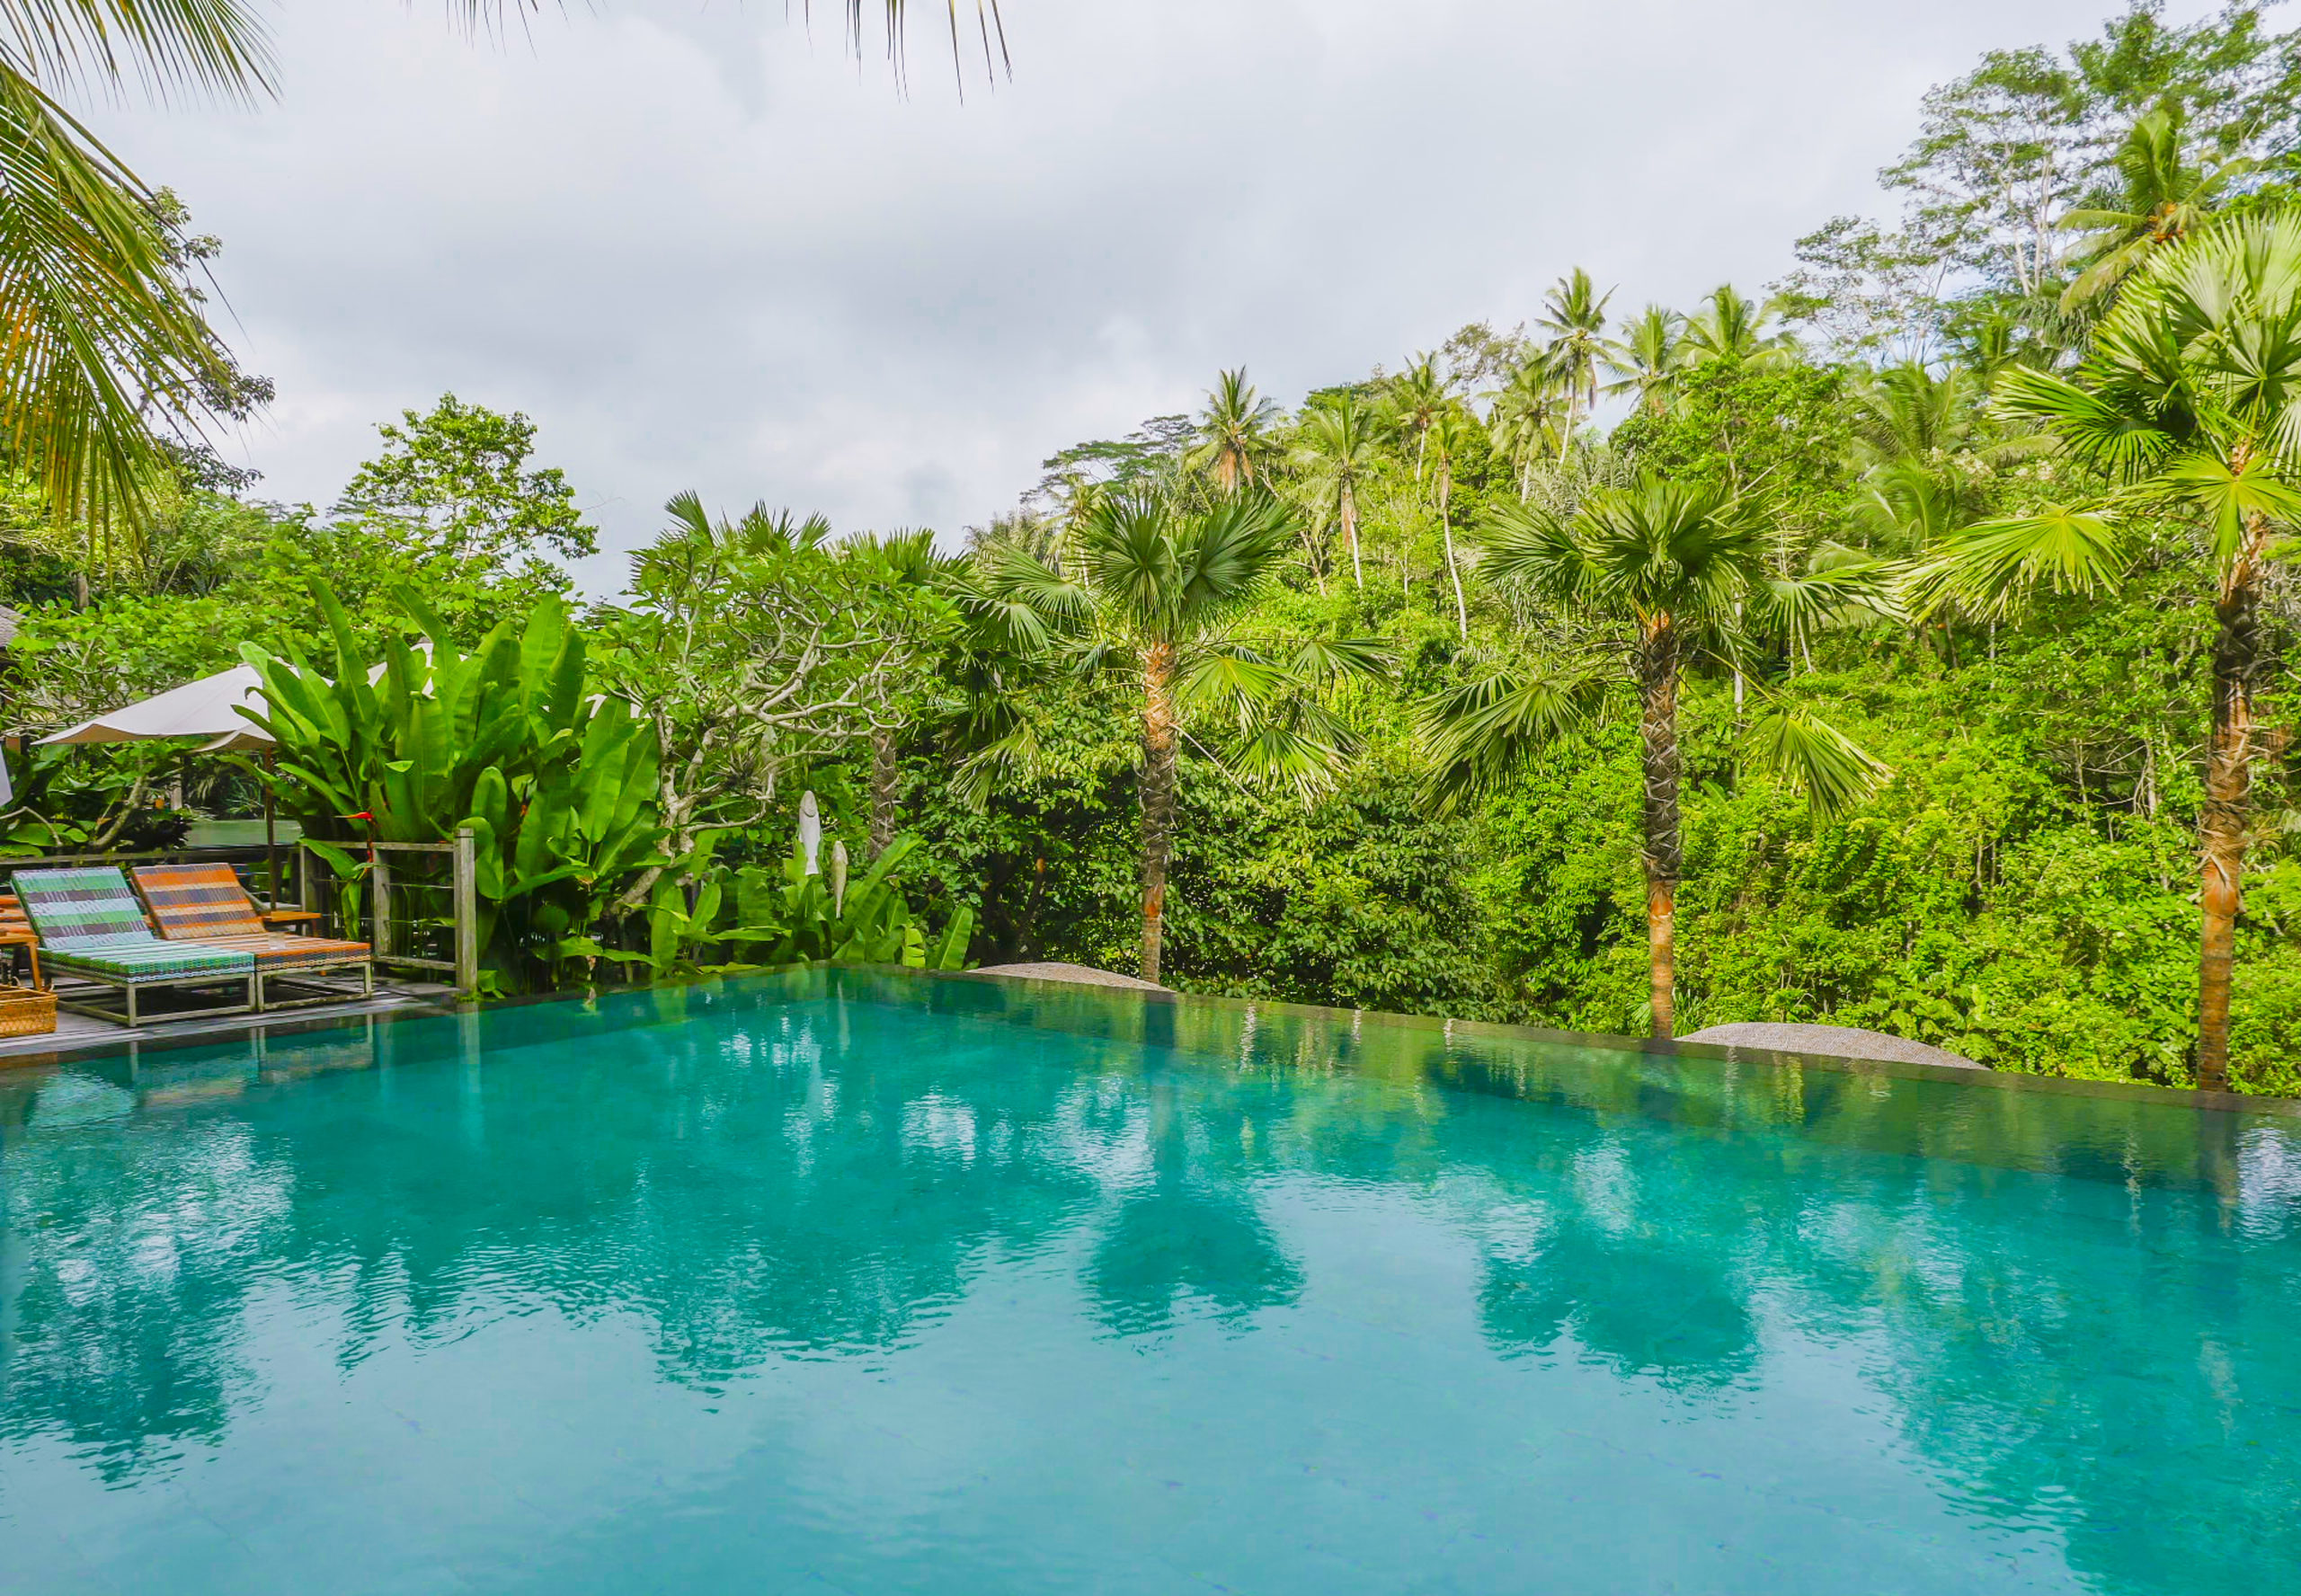 A tranquil Bali-inspired pool nestled amidst lush trees and featuring comfortable lounge chairs by the side, providing a serene and relaxing oasis.